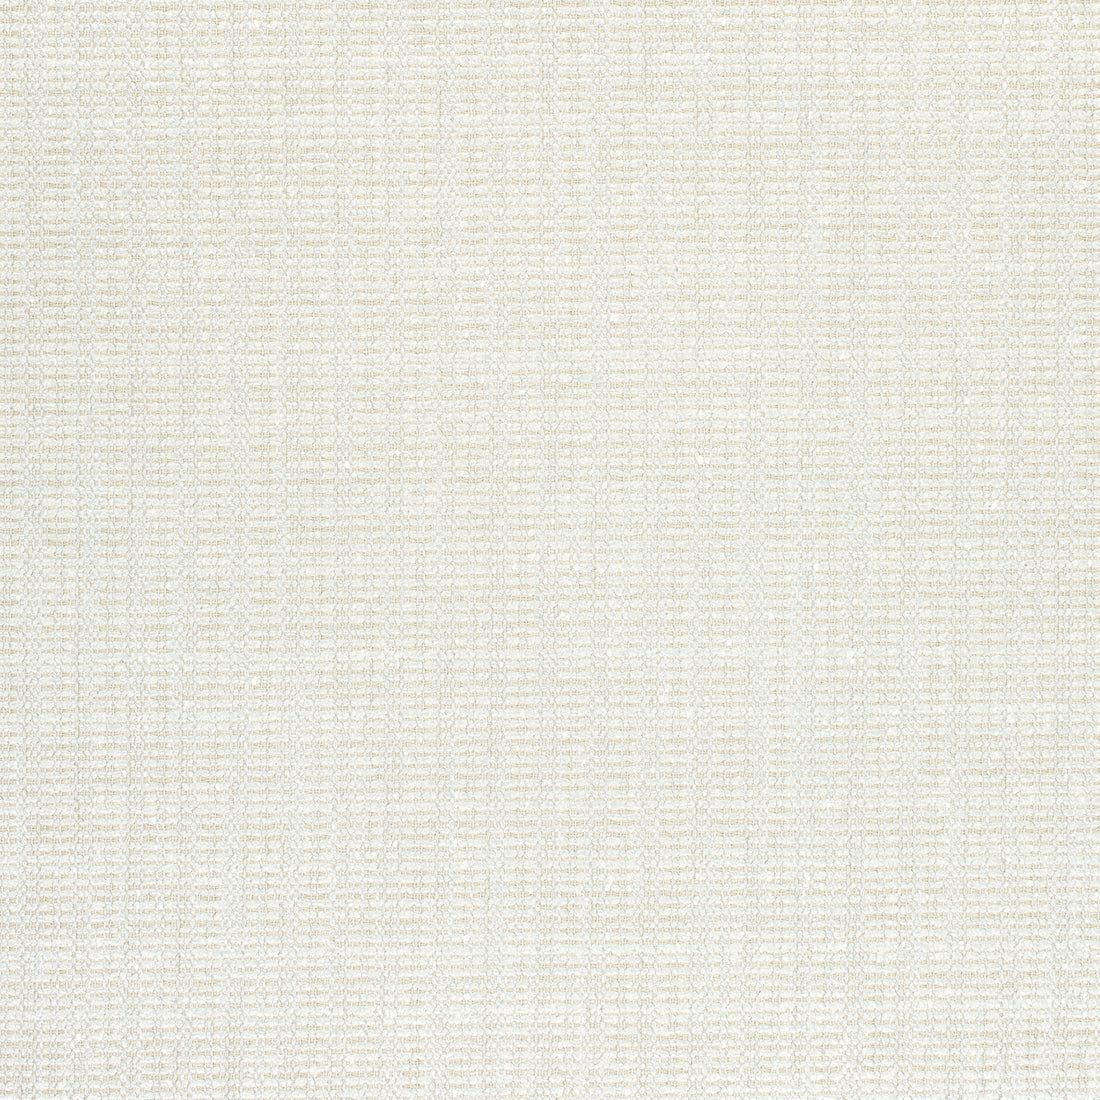 Avery fabric in flax color - pattern number W789137 - by Thibaut in the Reverie collection